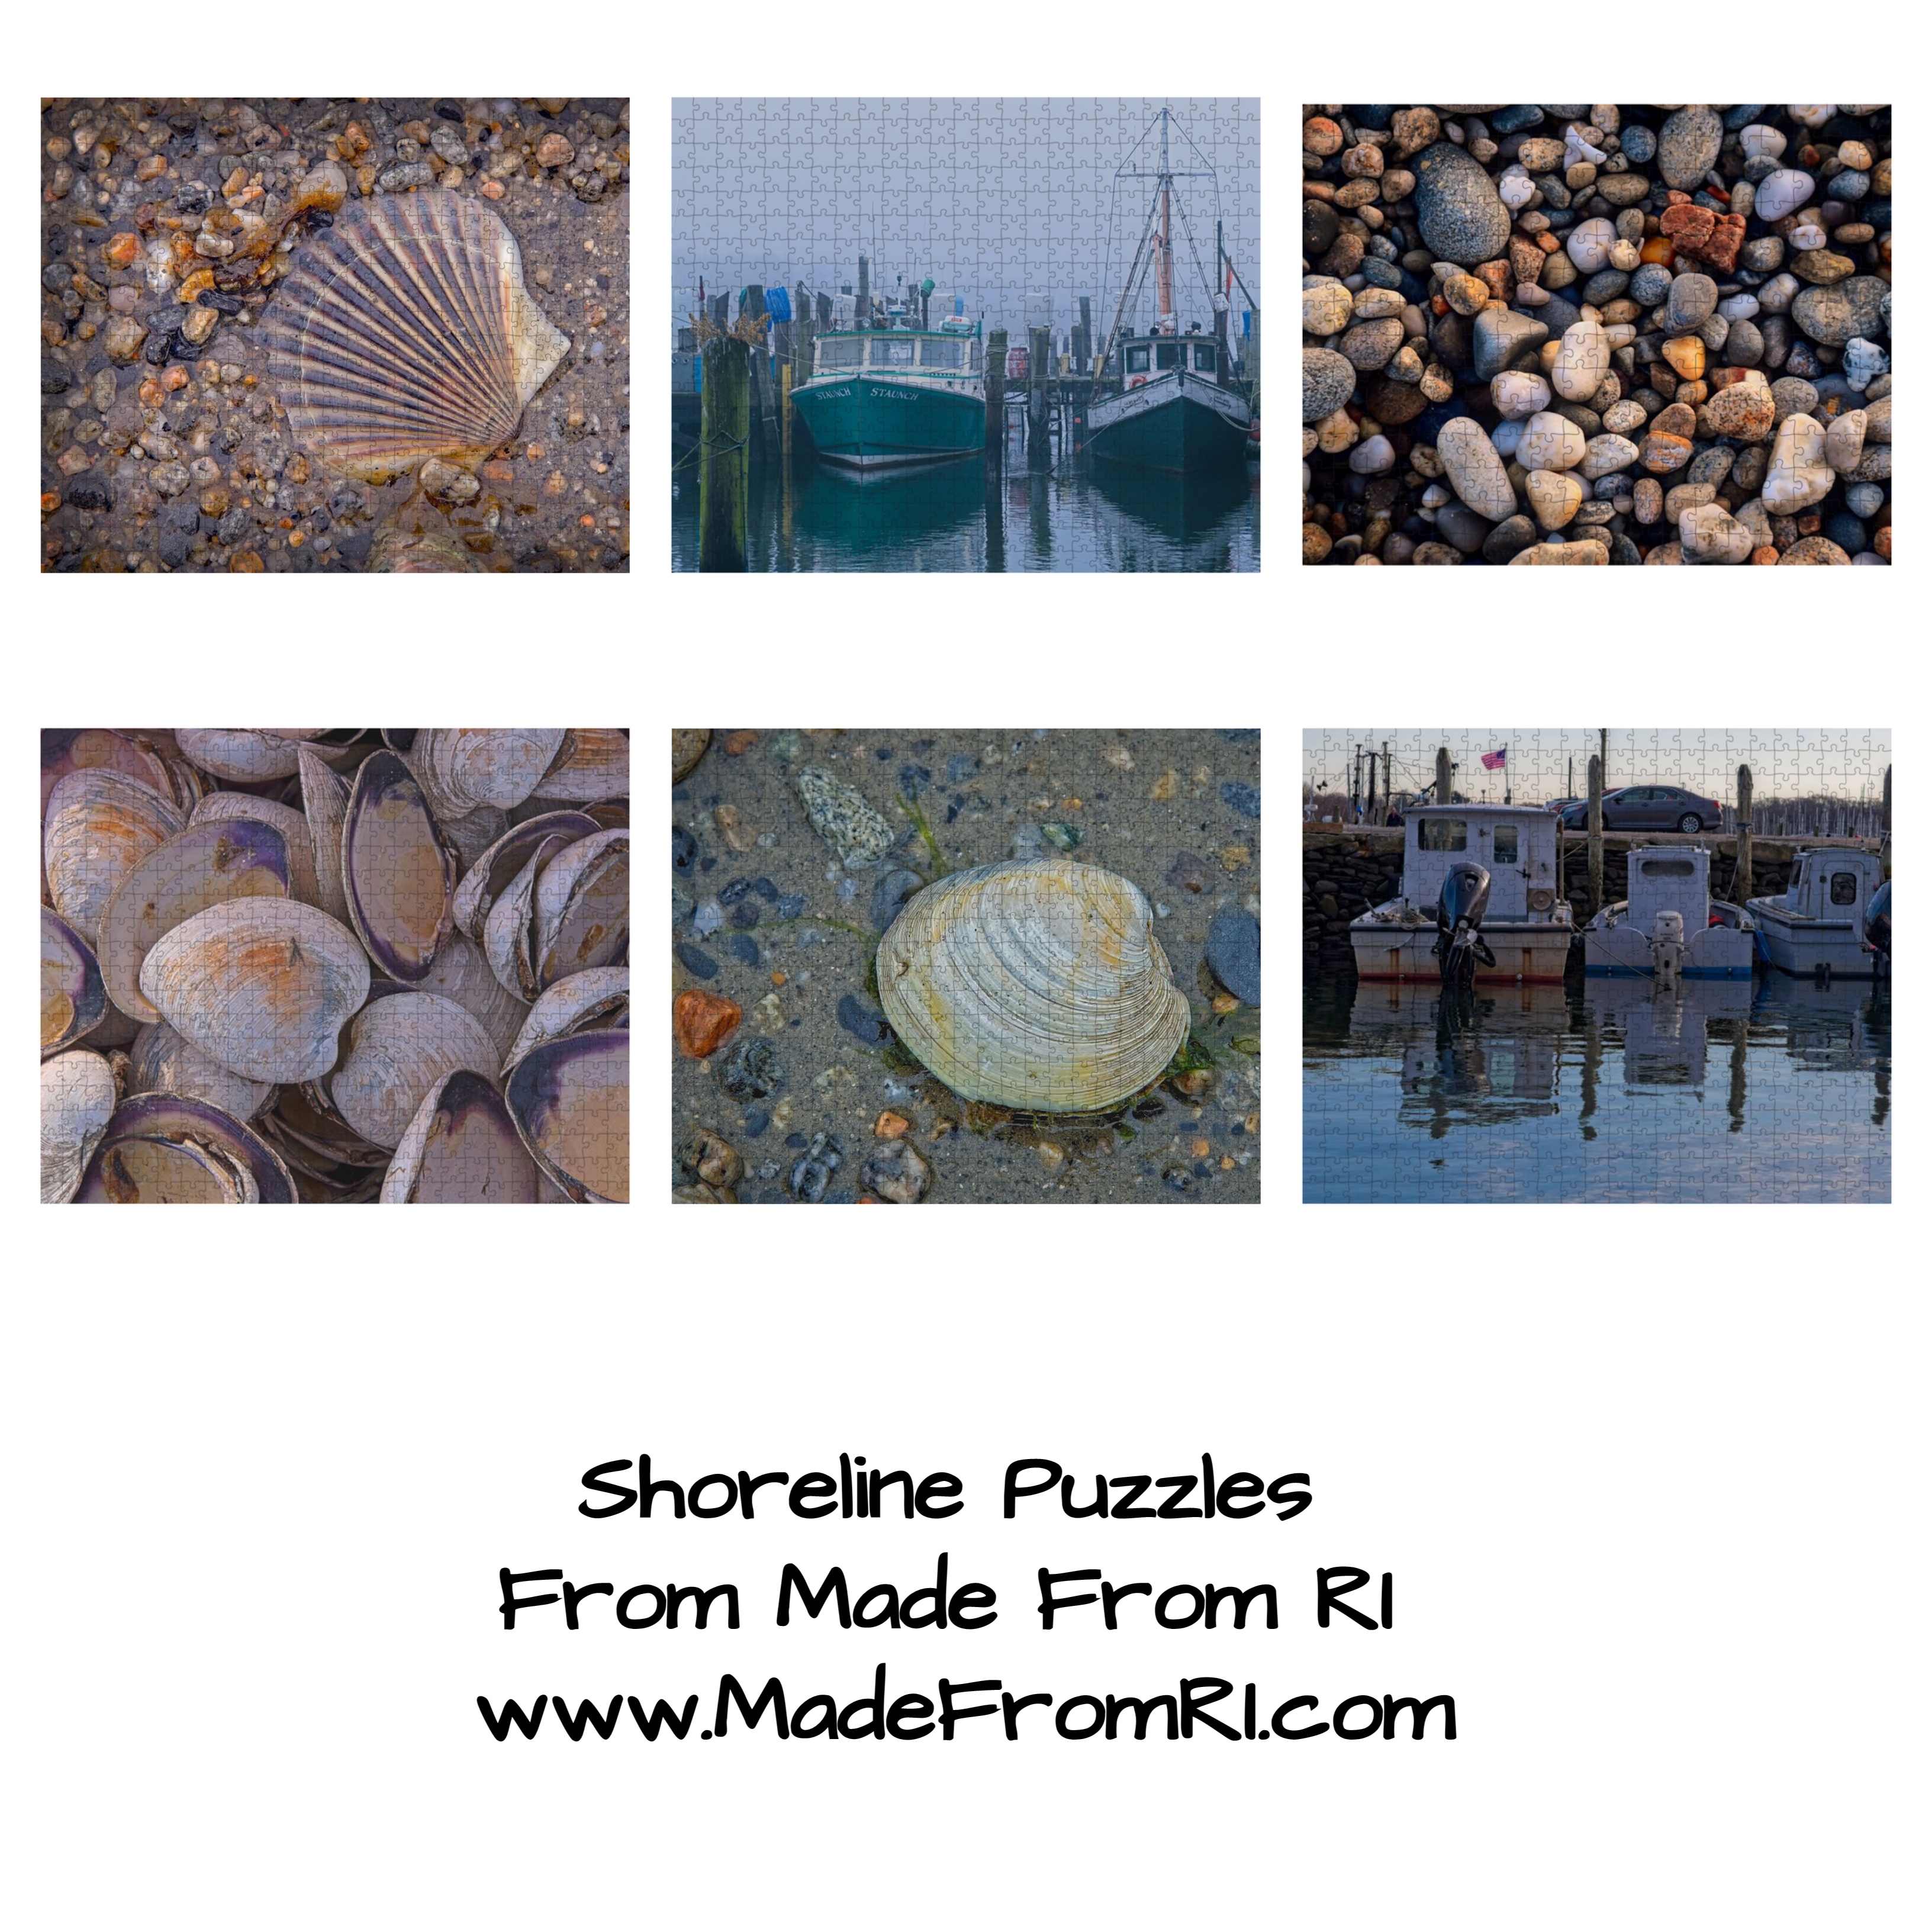 Made From RI Shoreline Puzzles